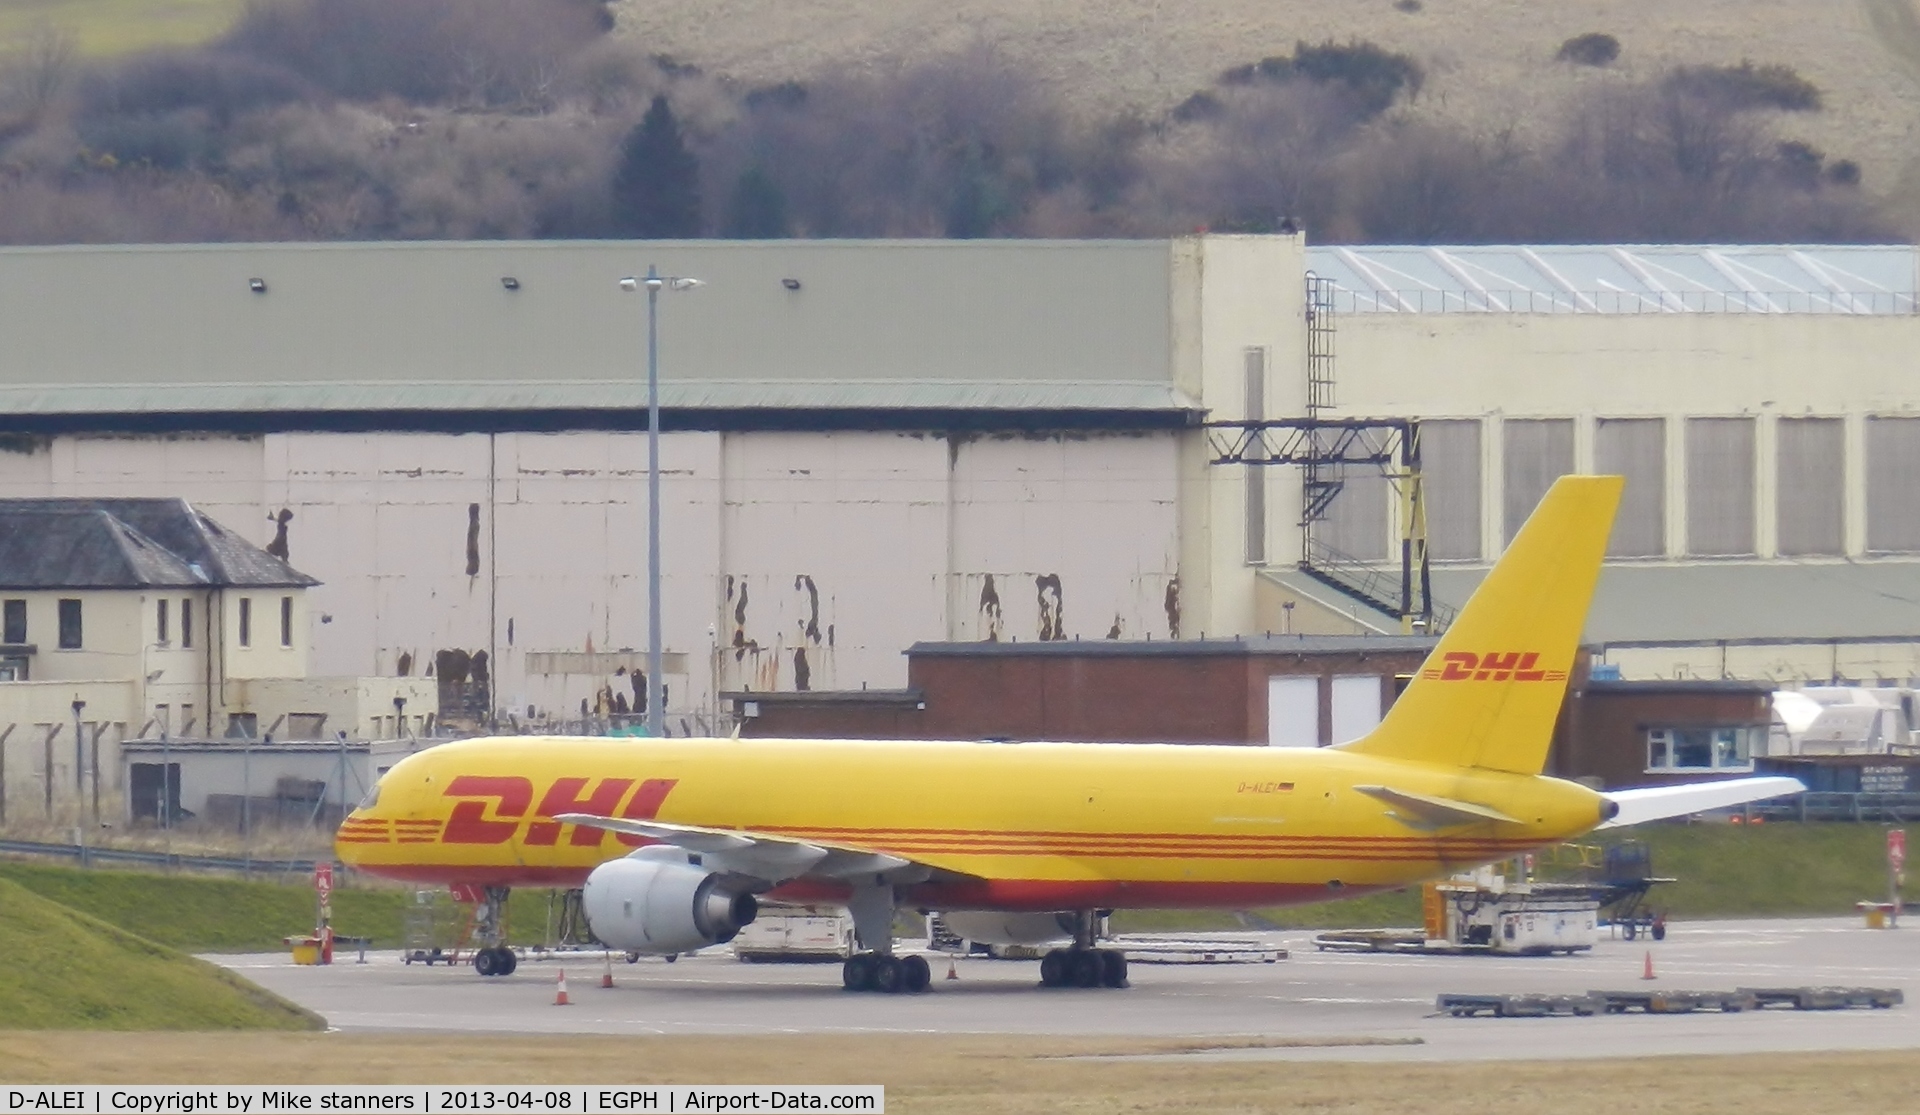 D-ALEI, 1986 Boeing 757-236/SF C/N 23493, DHL B757 On the freight ramp,photographed from the multi-storey car park